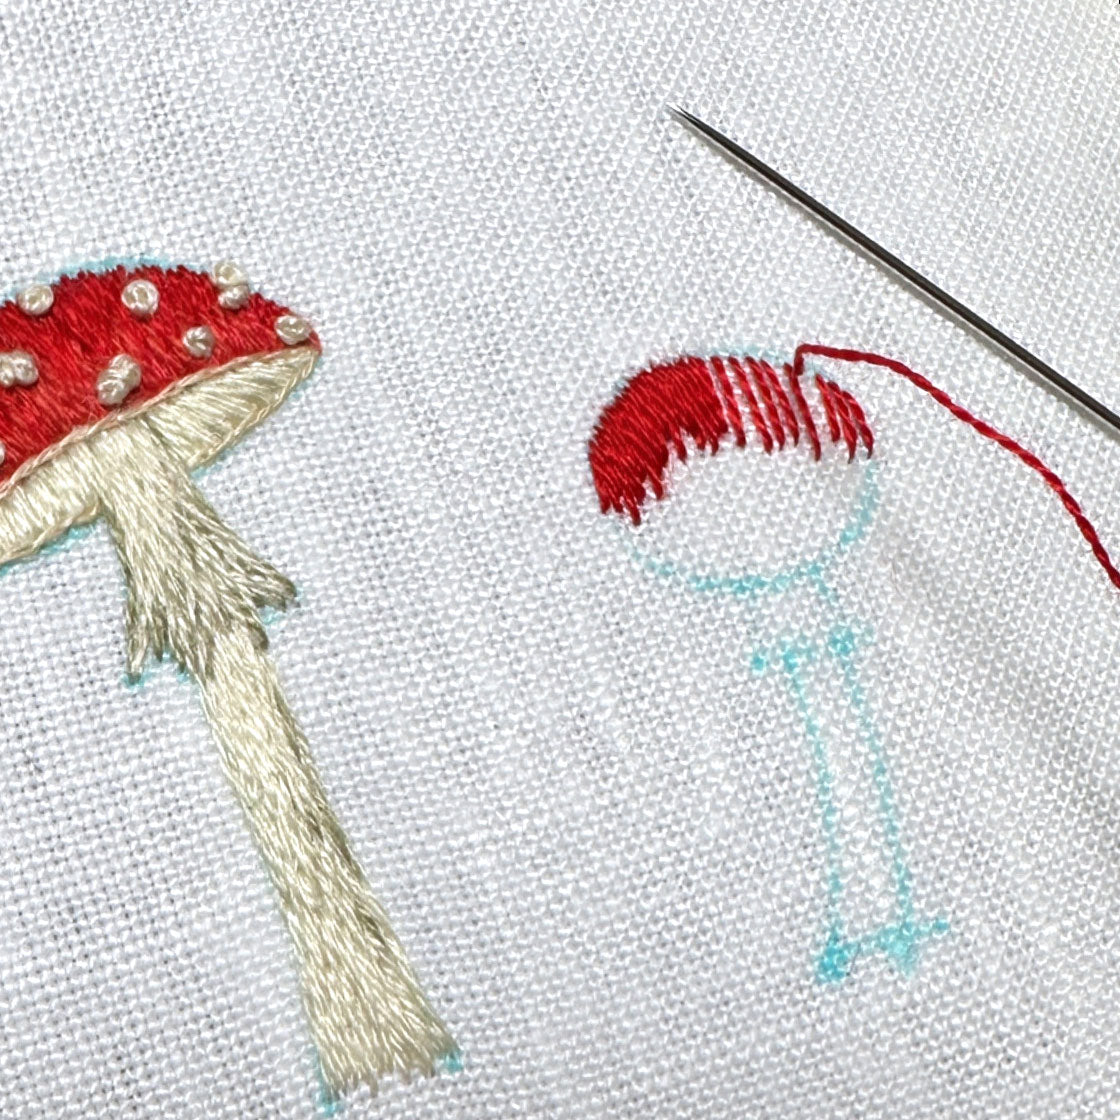 Field of Amanita Mushrooms and Wildflowers (3.00") on White Linen Hand Embroidered Art